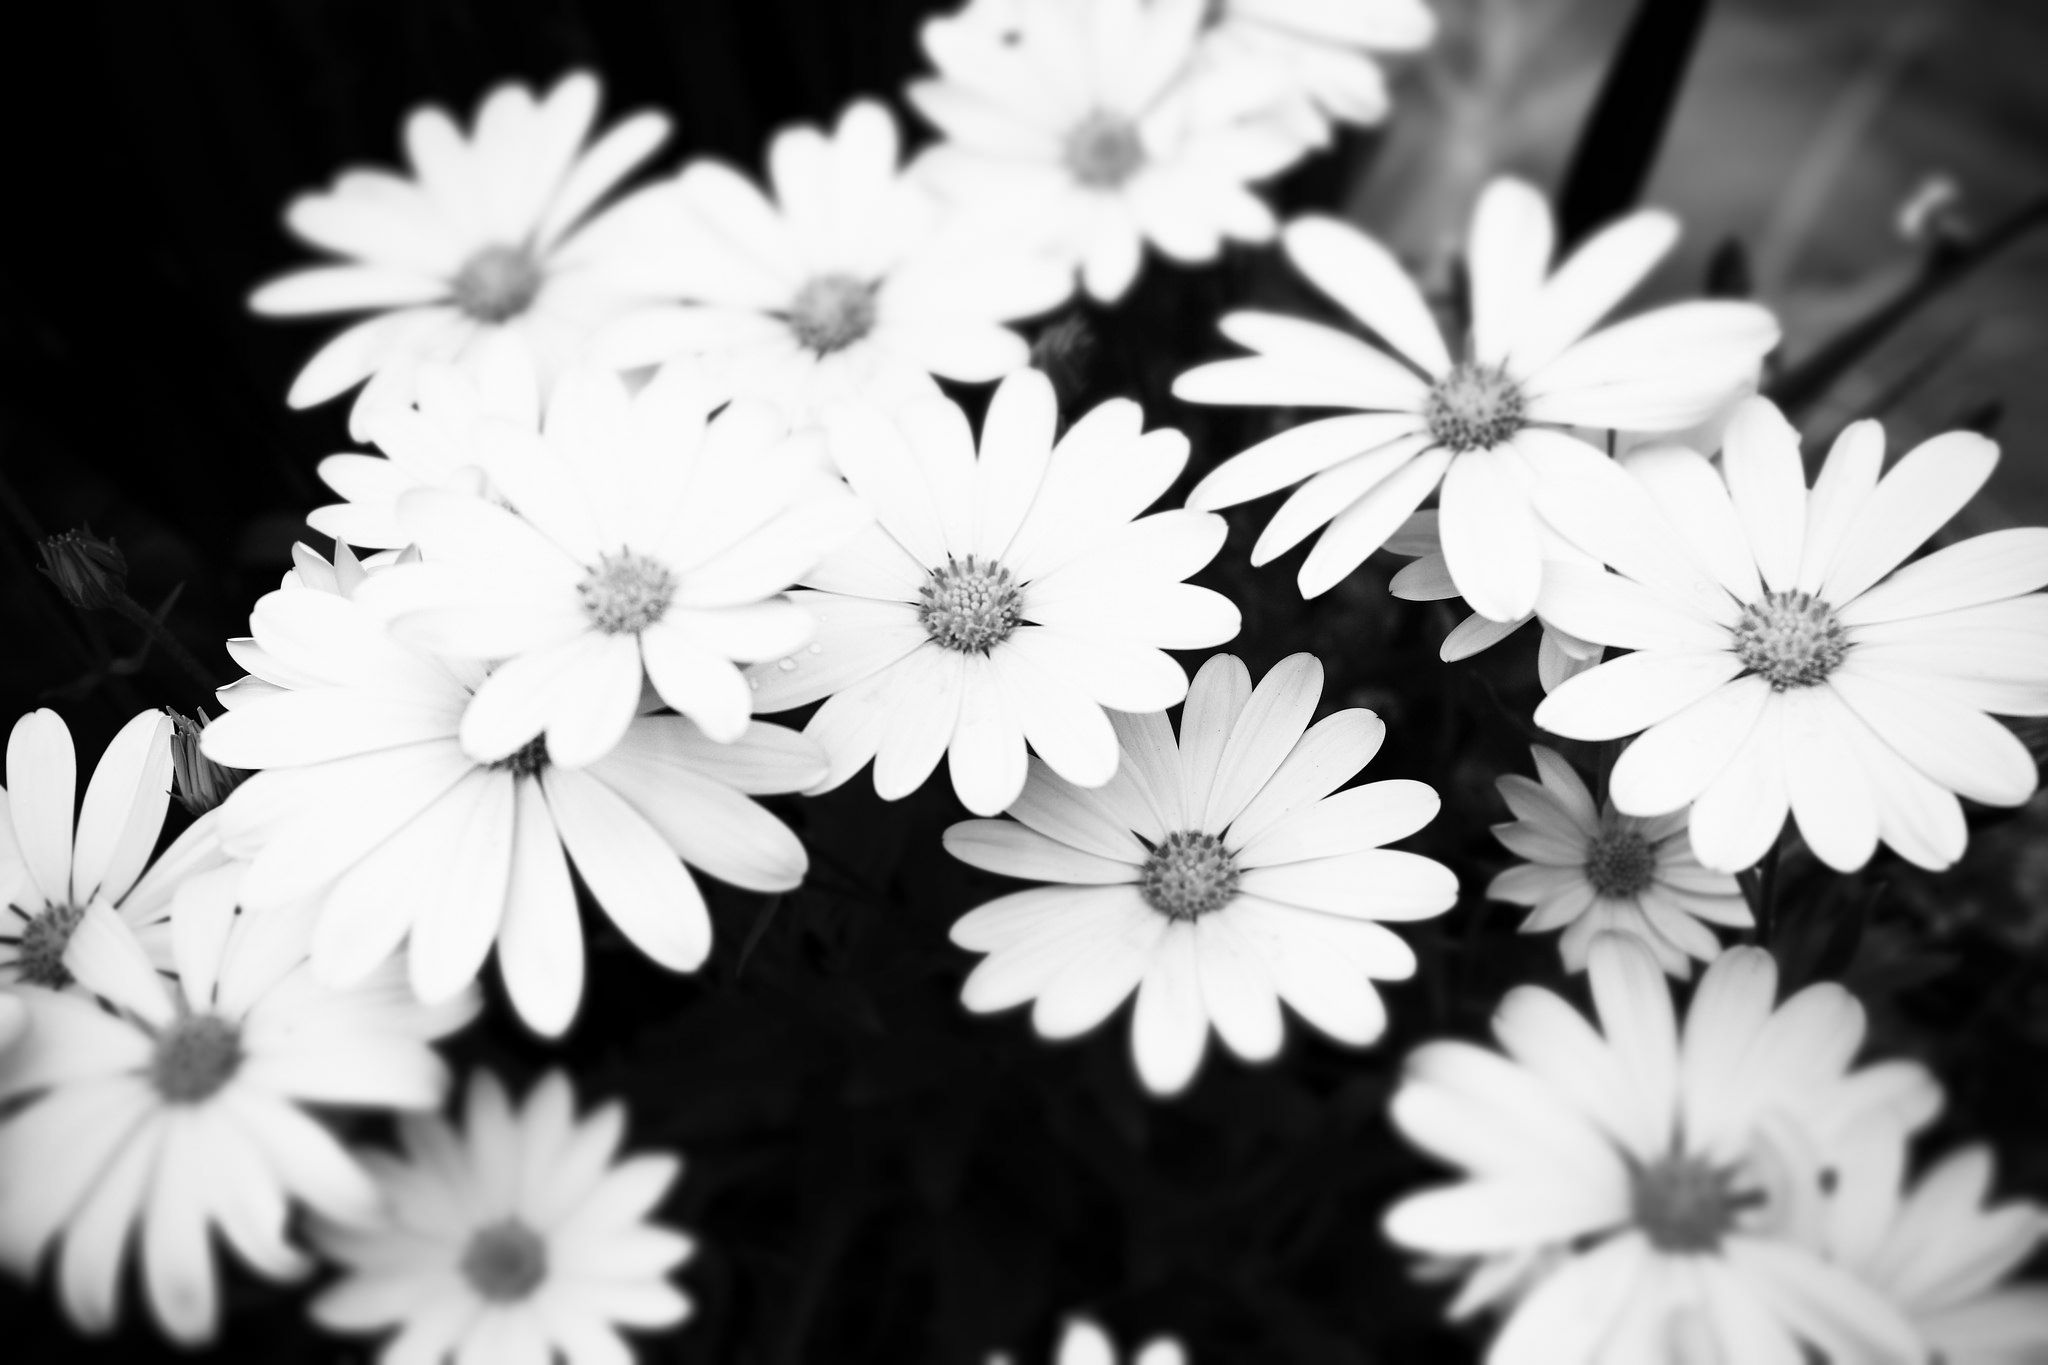 A black and white photo of some flowers - Black and white